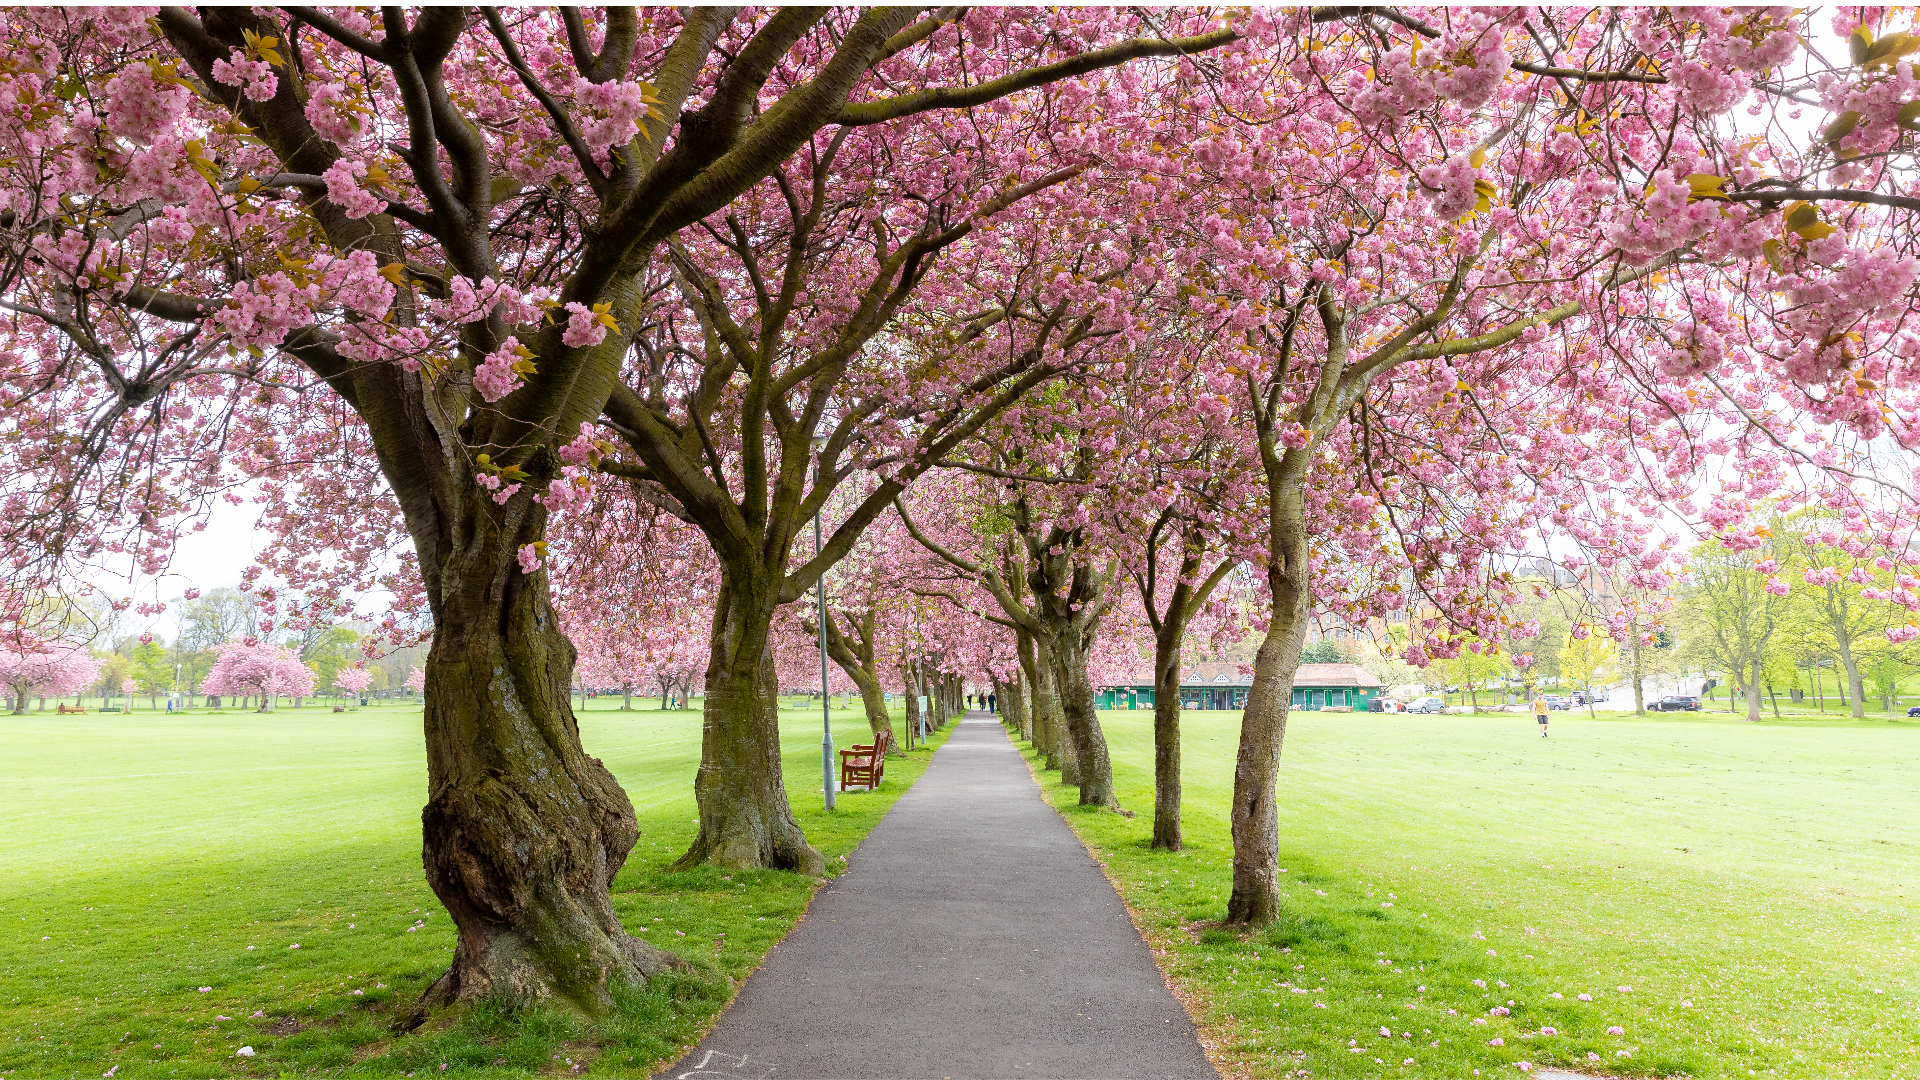 'These trees would have created a spectacular display of blossom in spring,' said Glasgow City Council’s head of parks and streetscene.